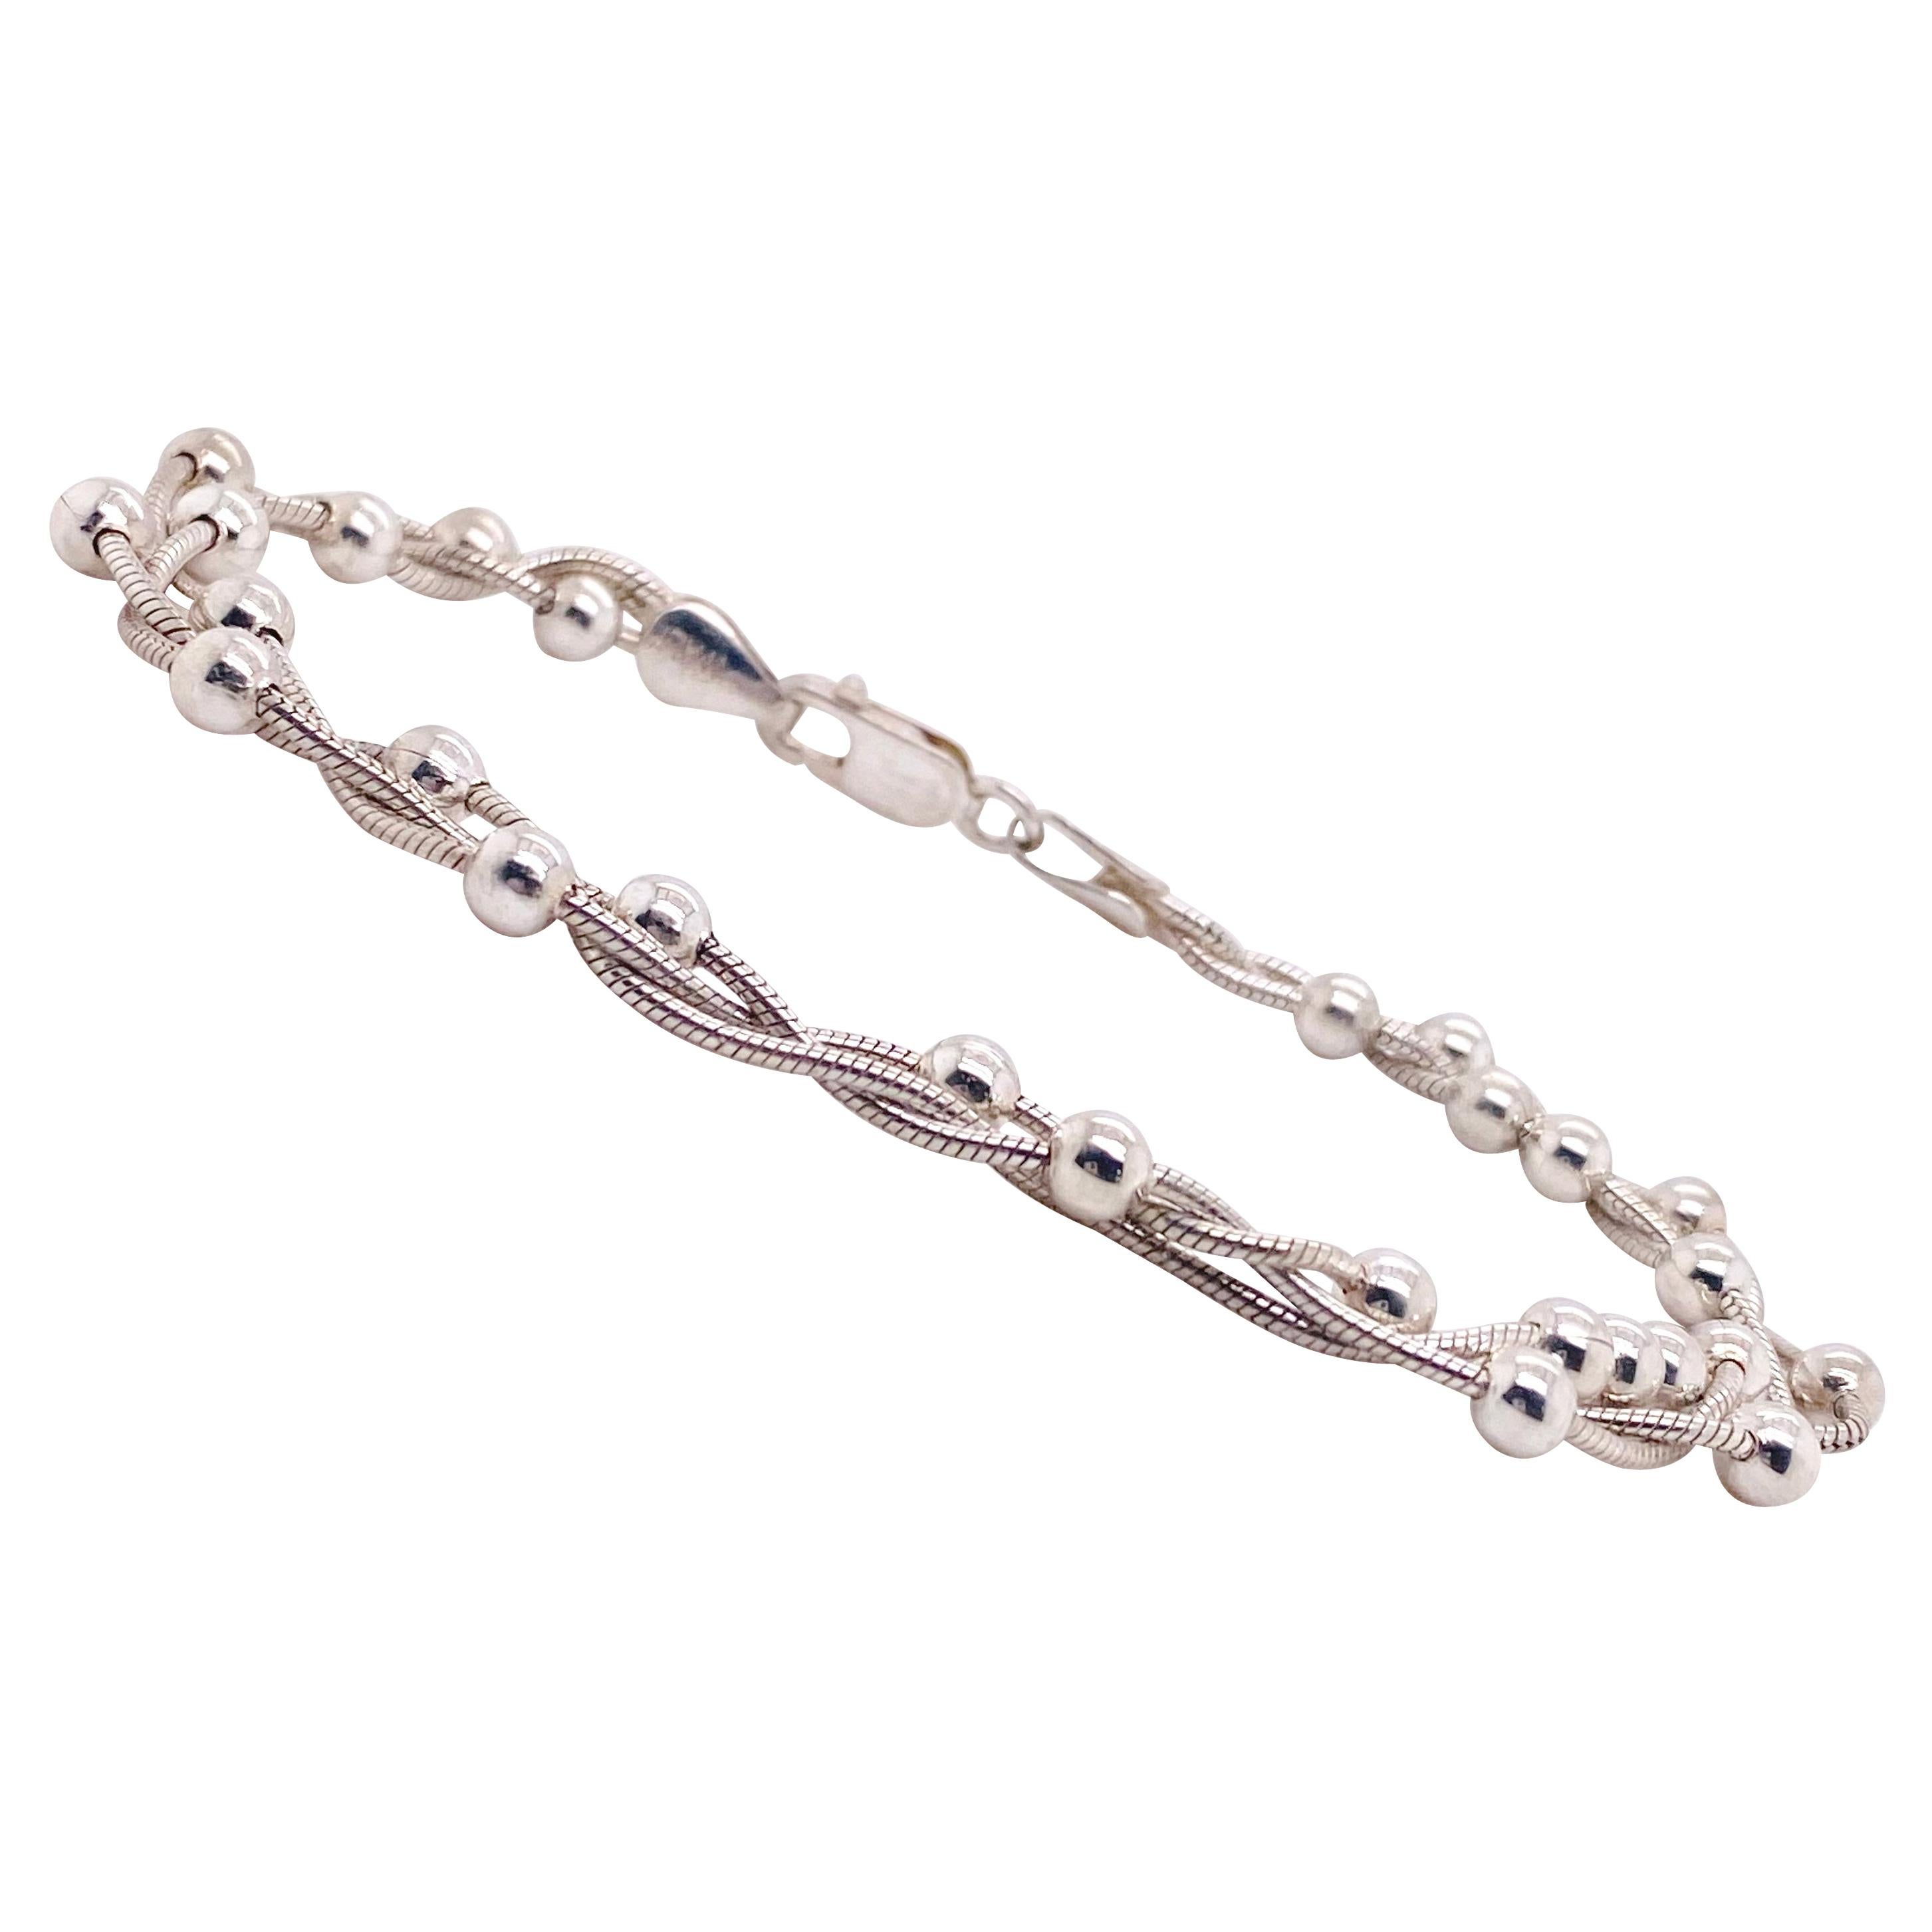 Beaded Twist Bracelet, Braided Snake Sterling Silver Chain with Beads, Silver For Sale